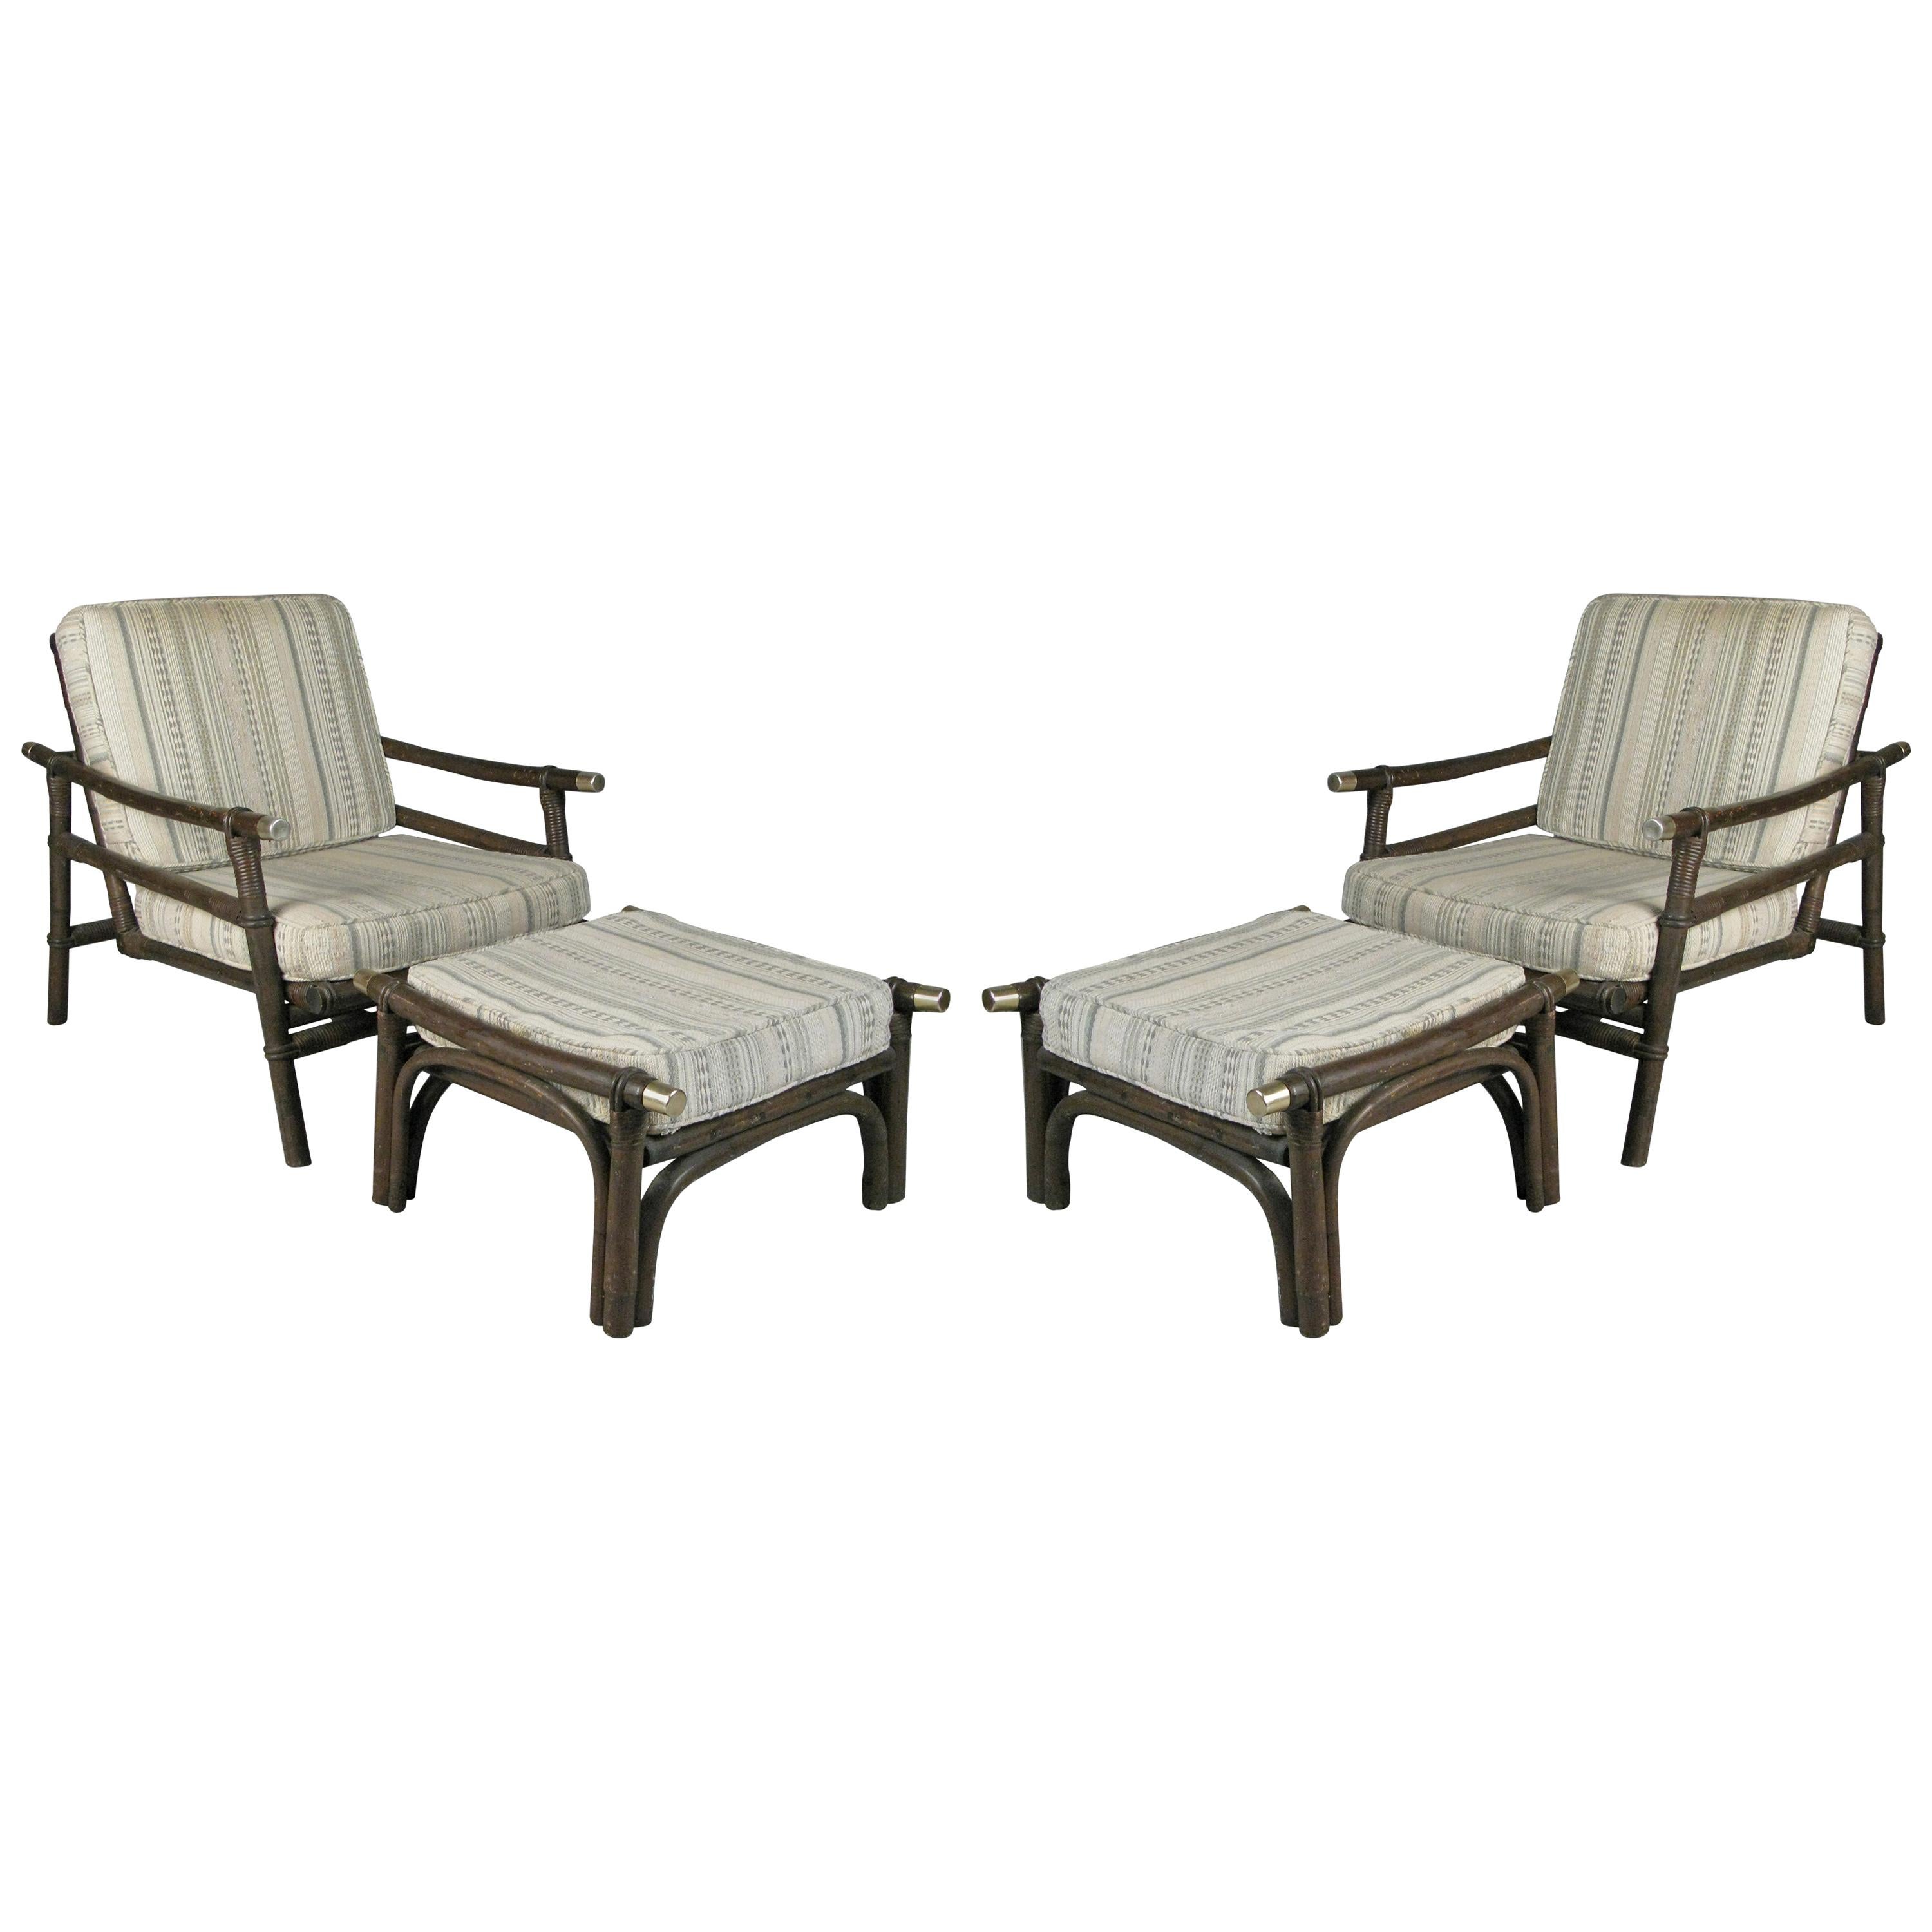 Pair of Rattan Lounge Chairs & Ottomans Style of Ficks Reed